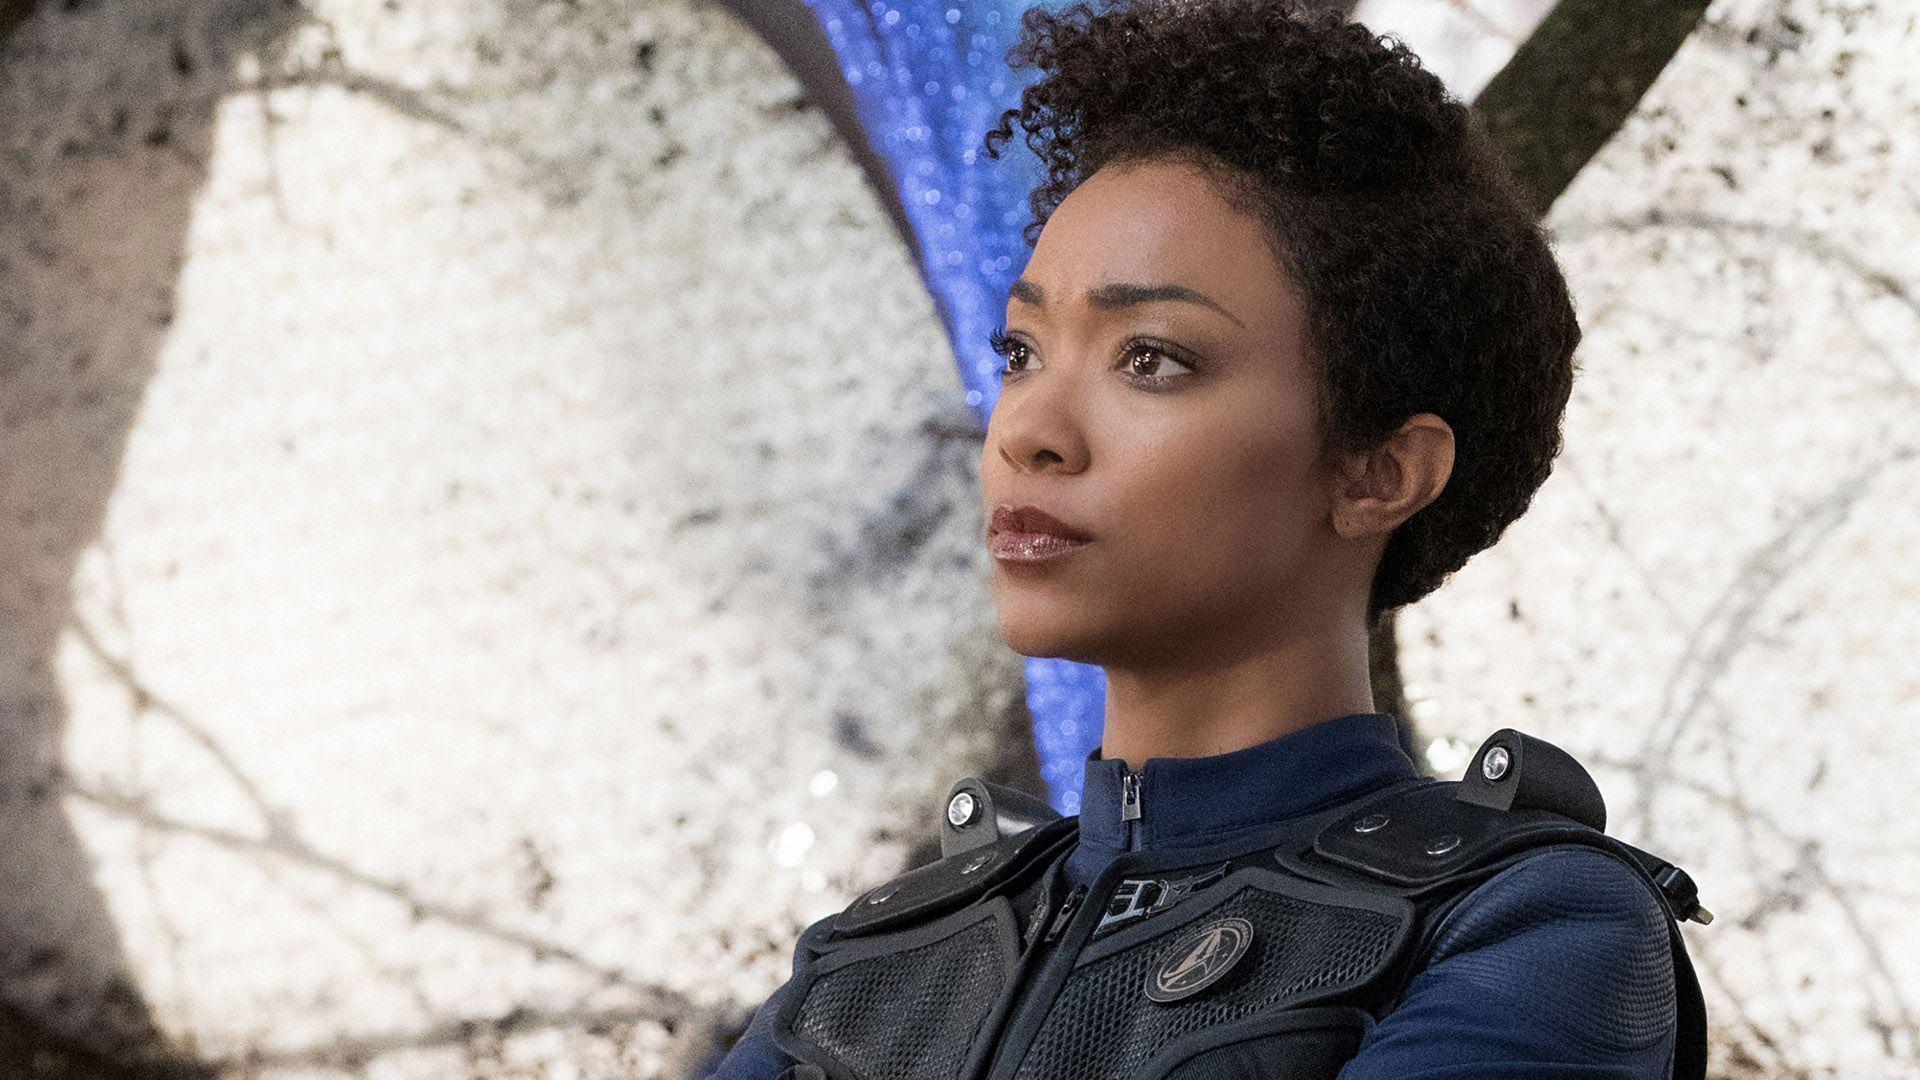 Check Out New Photo From Episode 8 Of Star Trek: Discovery